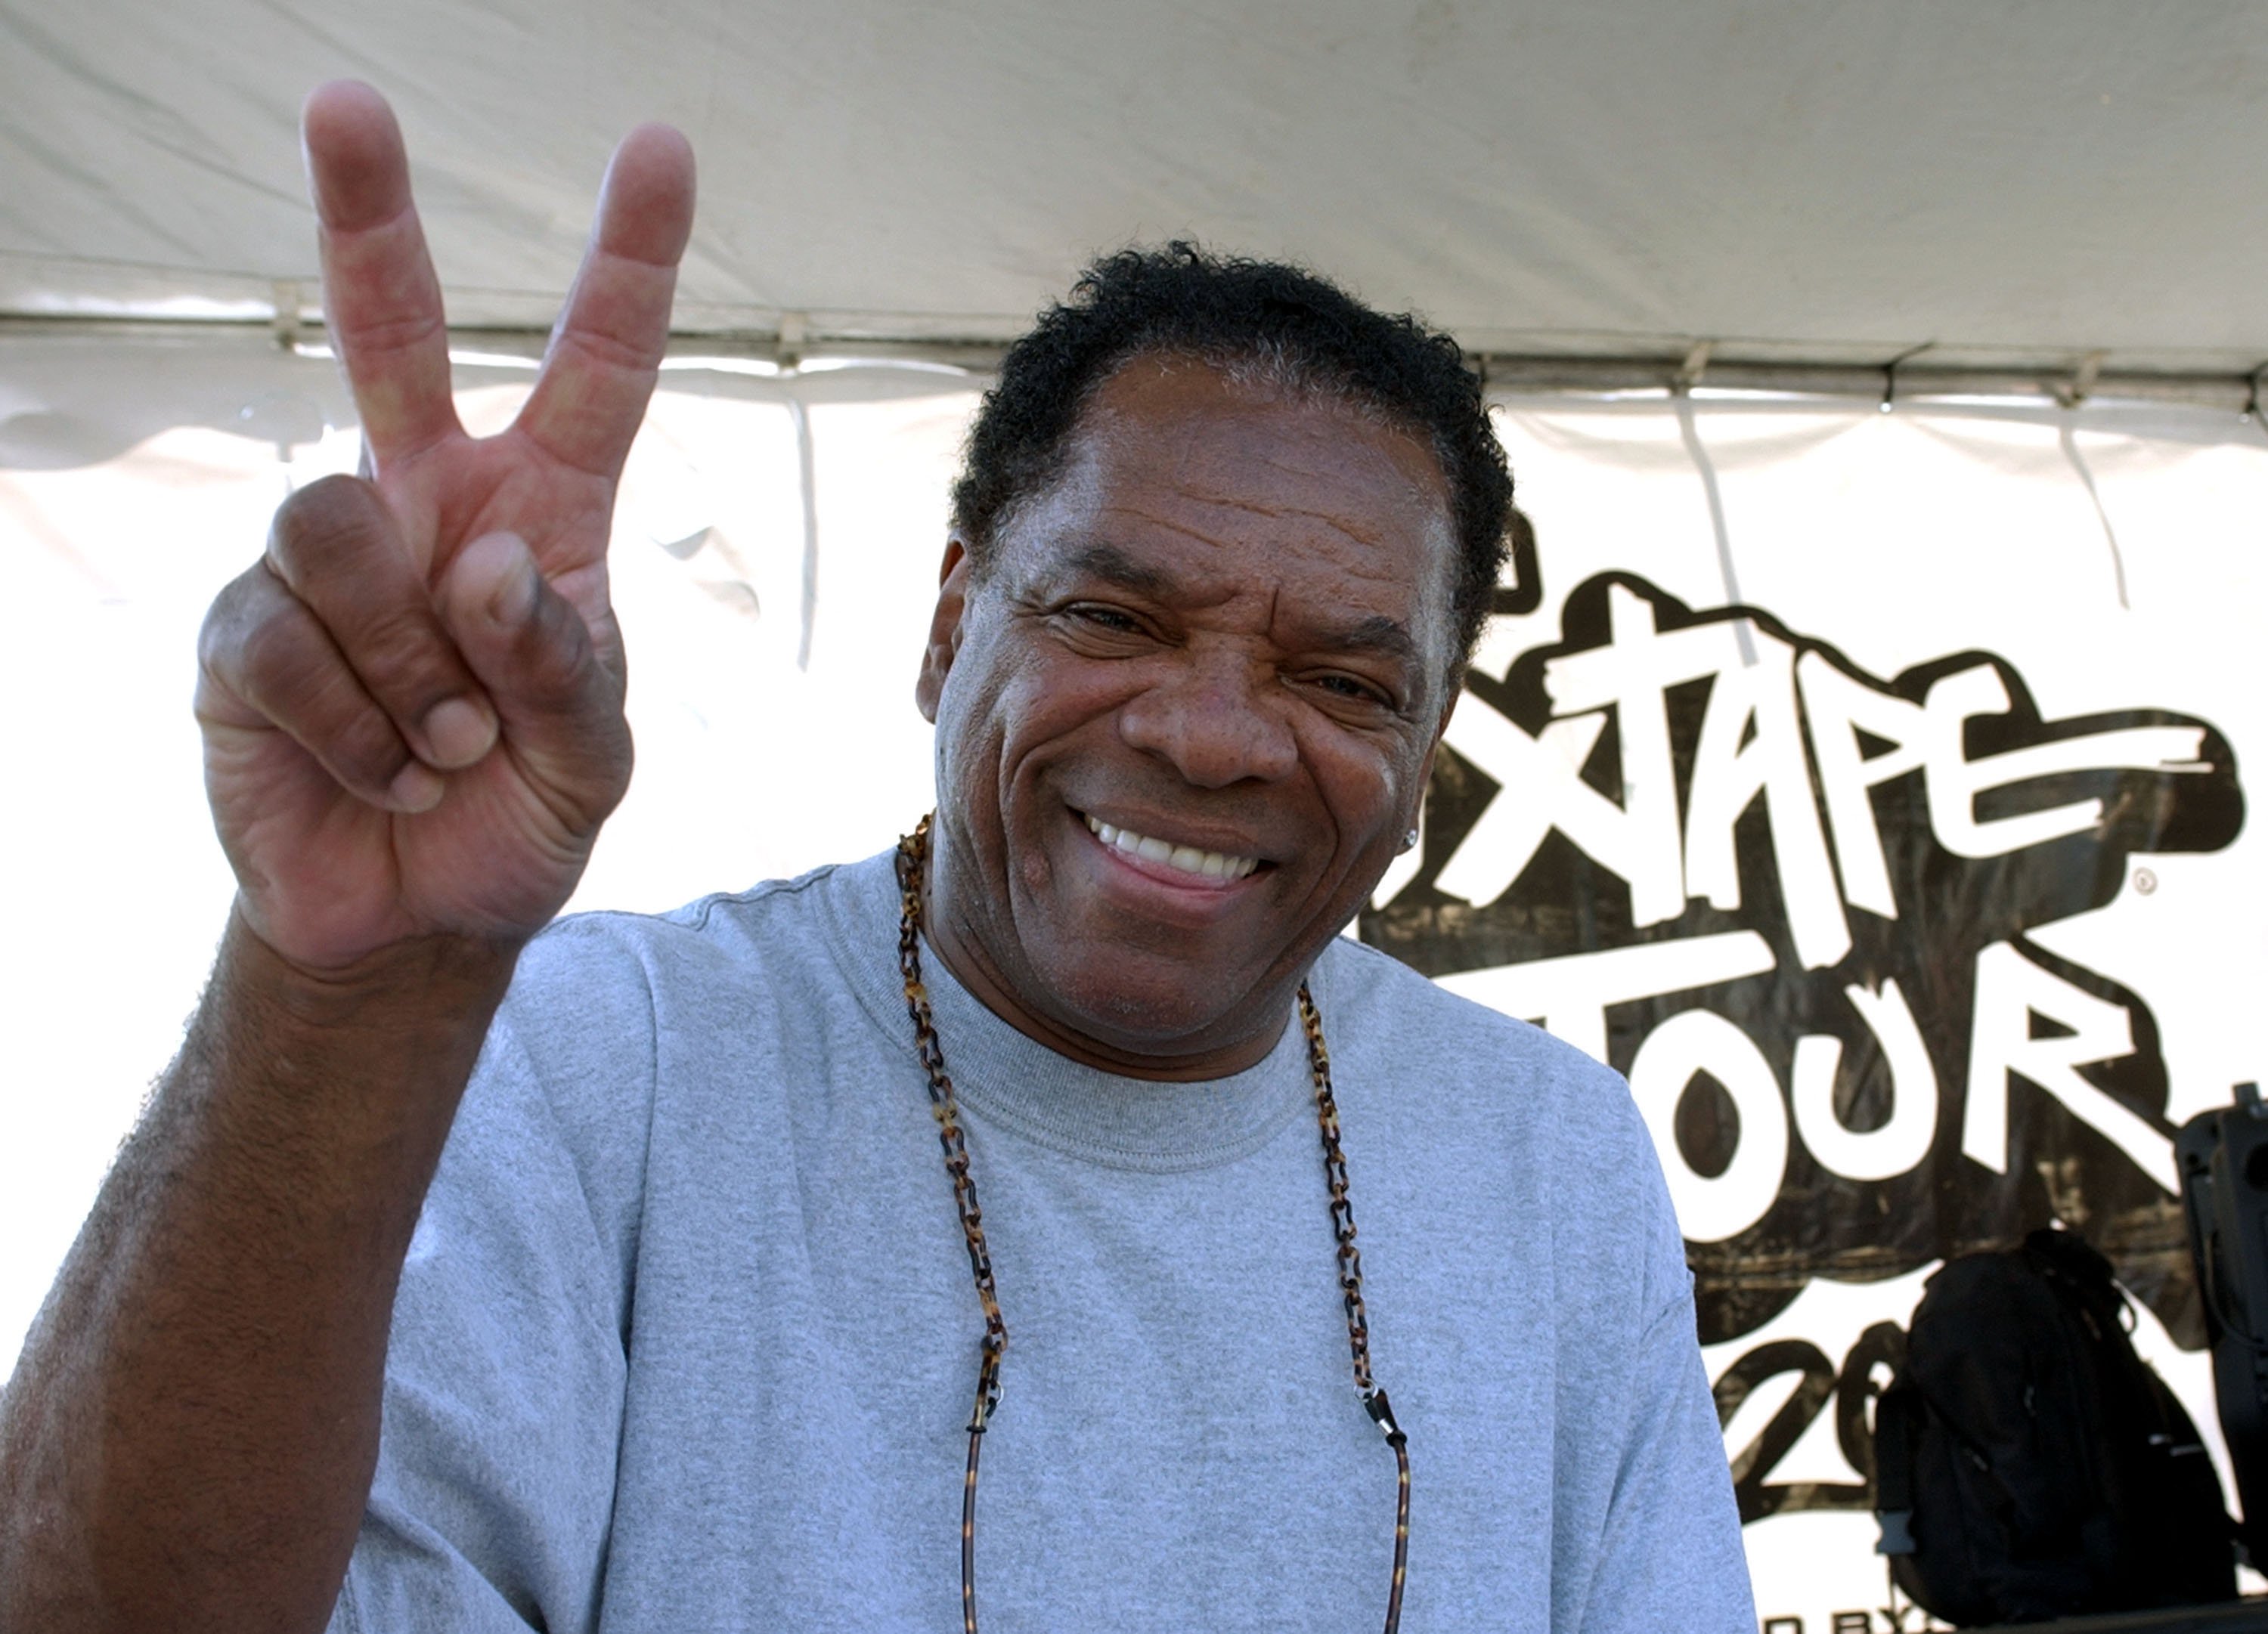 John Witherspoon at the The Great Western Forum in Inglewood, California on June 9, 2004 | Photo: Getty Images